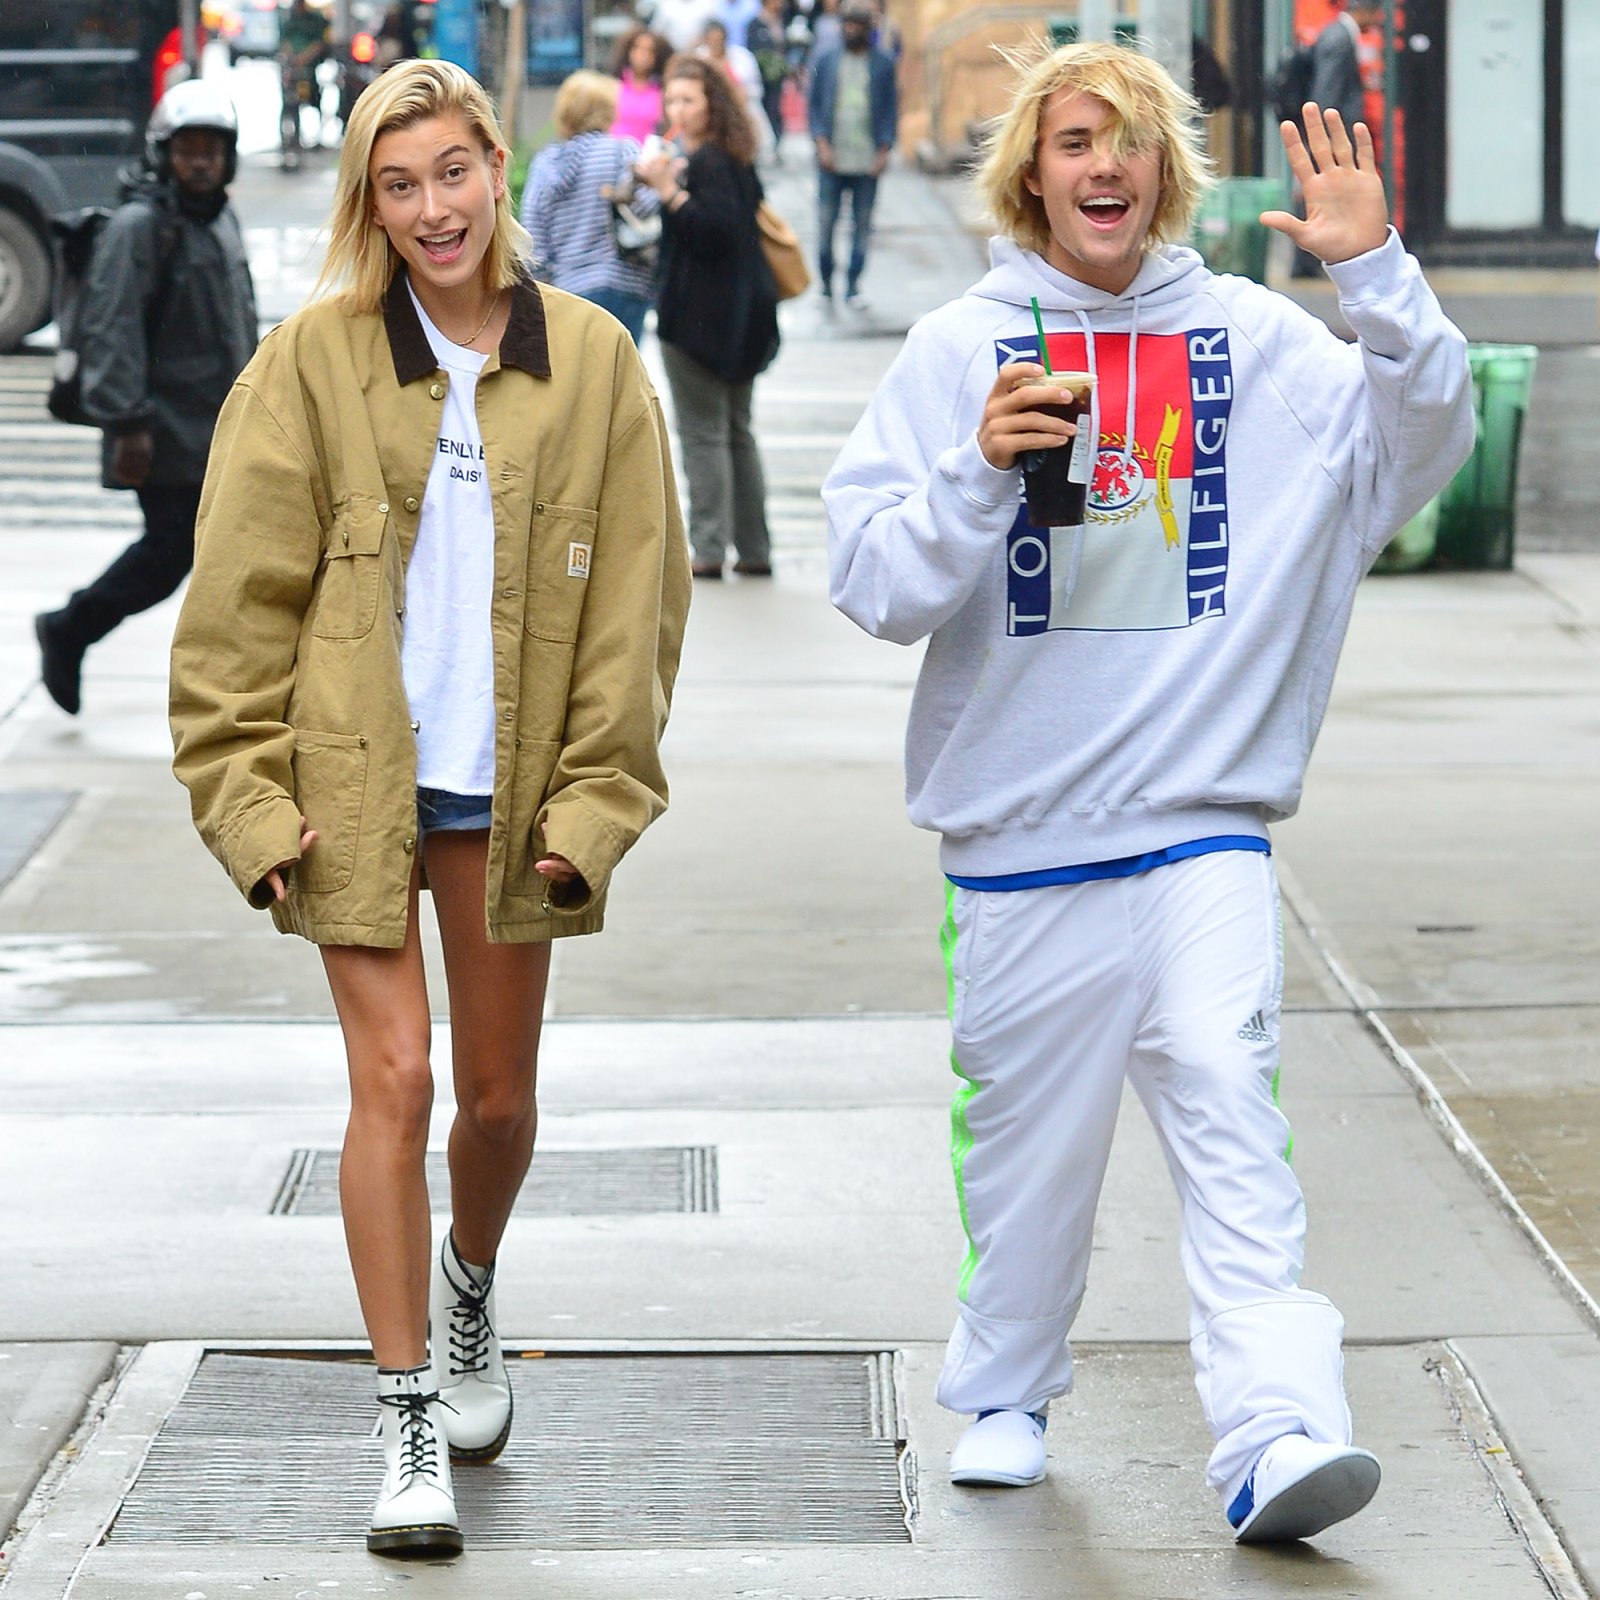 Justin Bieber, Hailey Baldwin, Relationship Timeline, Engaged, Friends, Reached Out